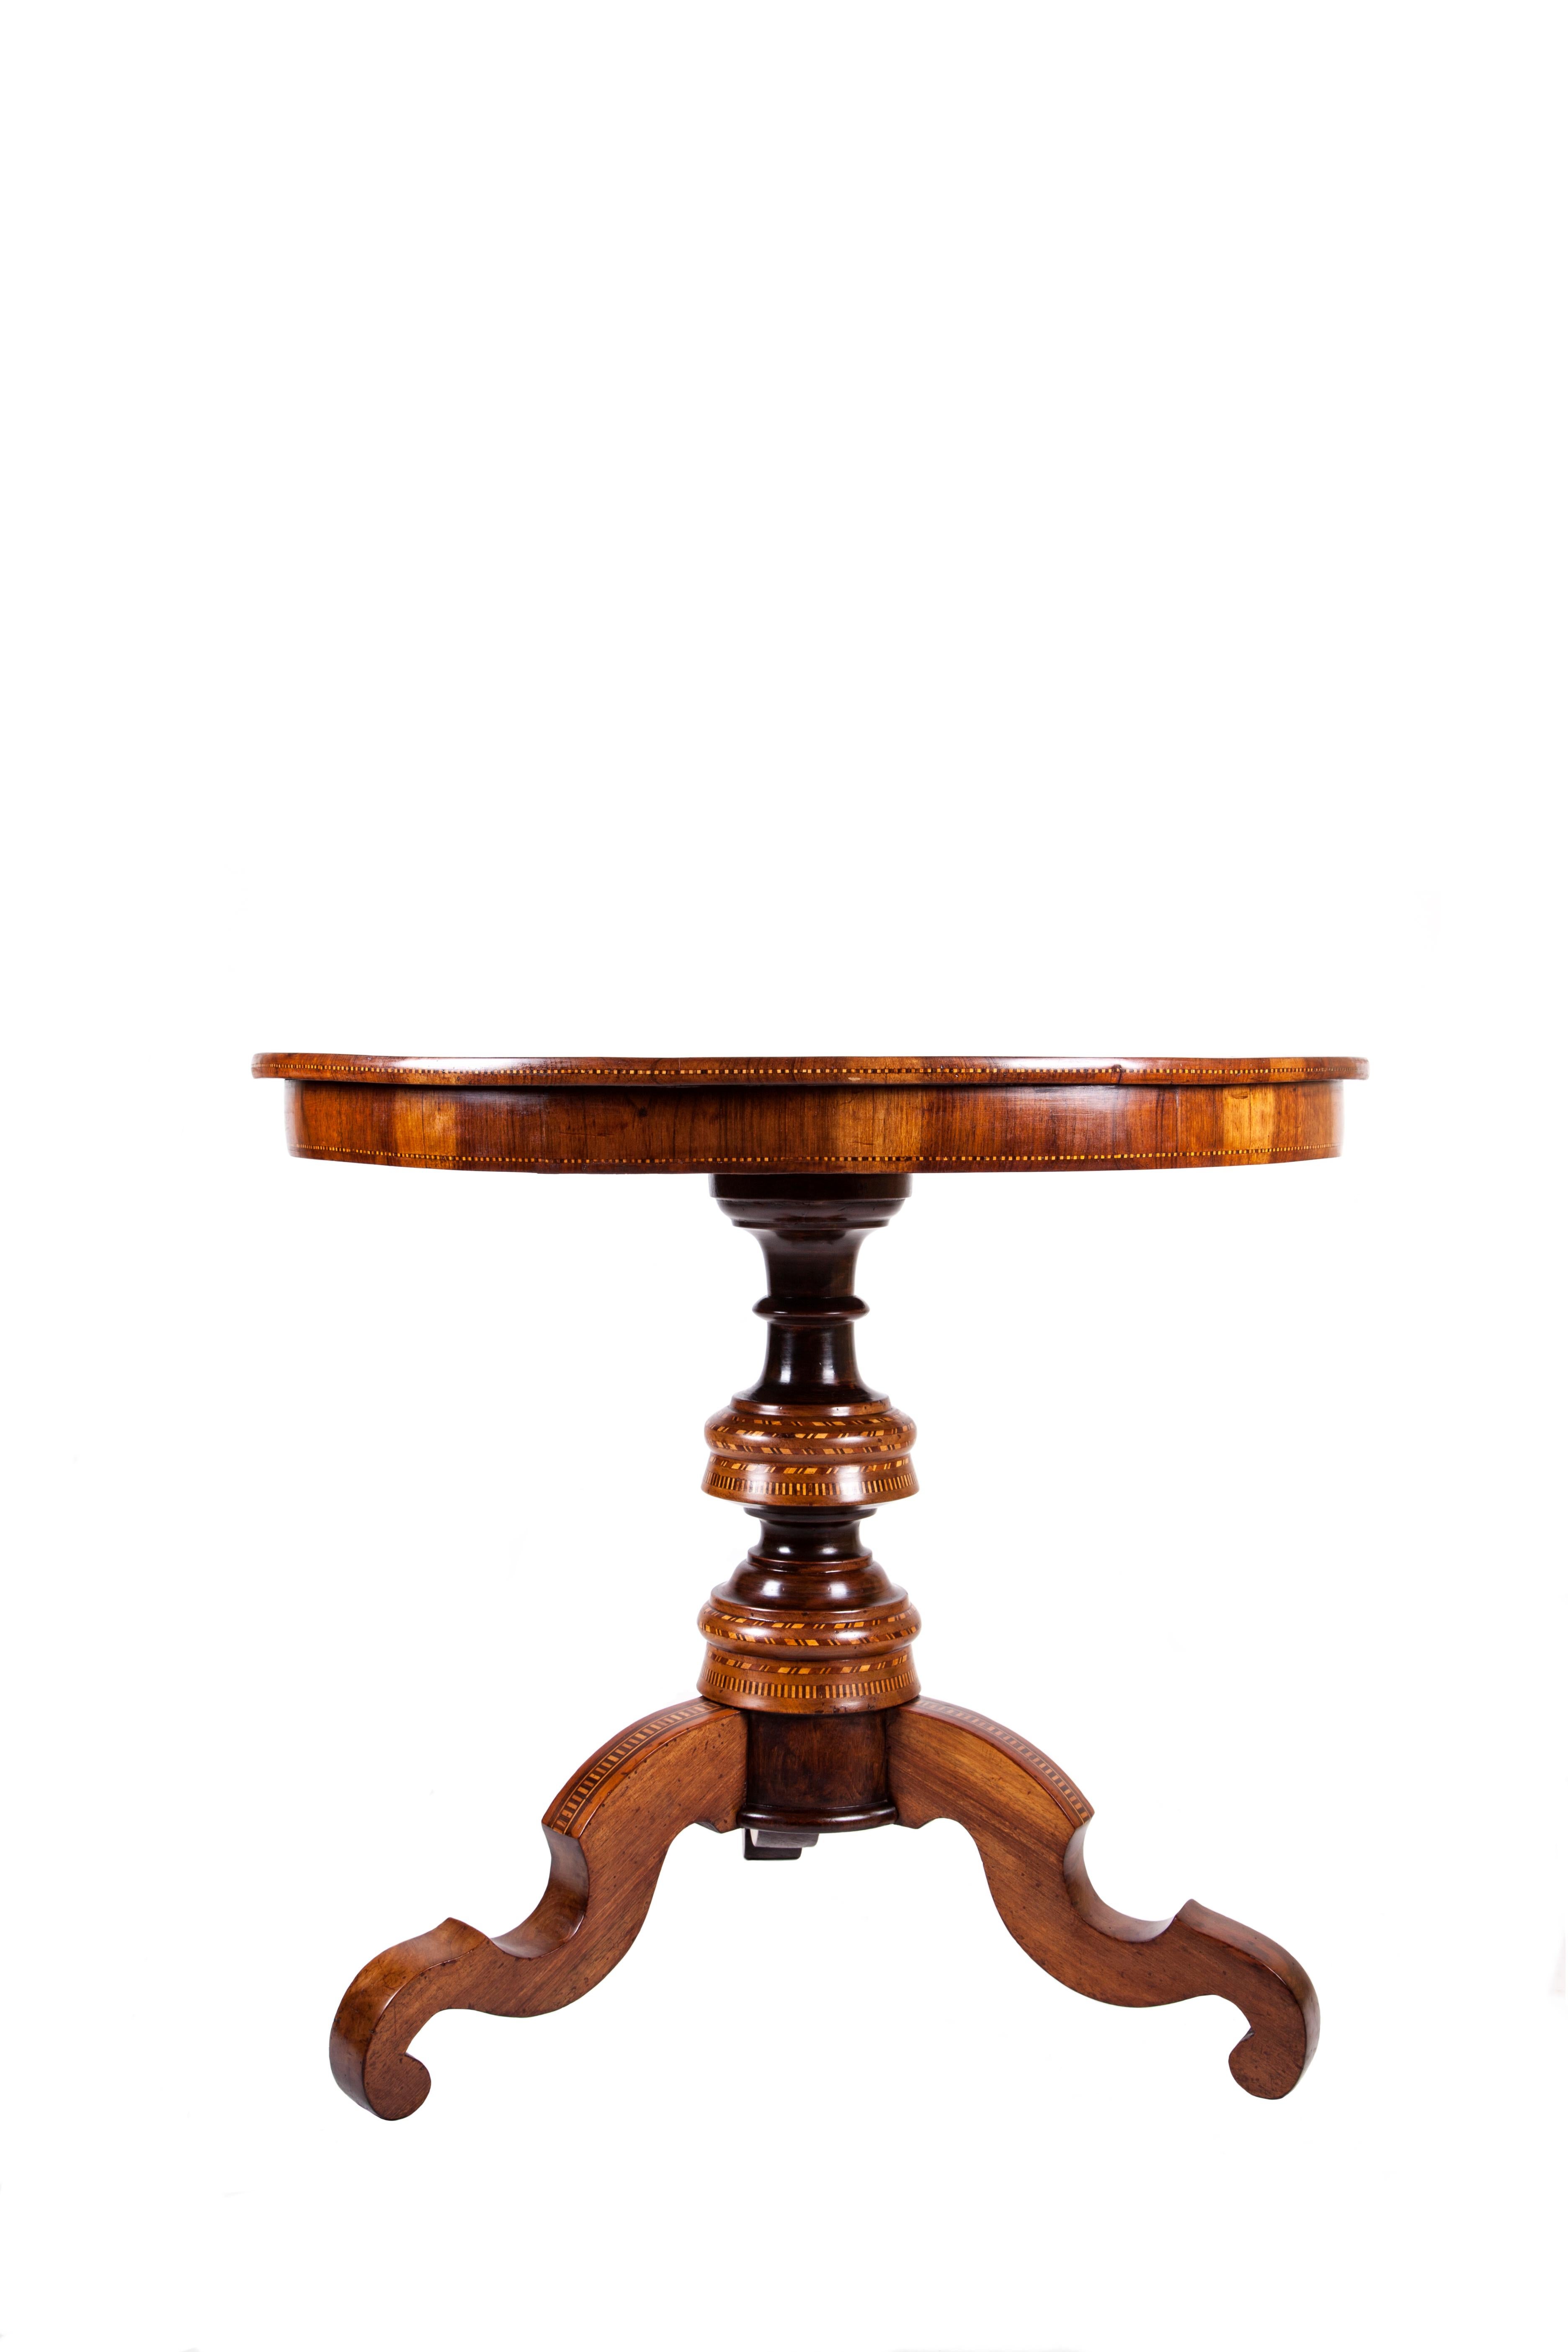 19th century Italian rolo inlaid coffee table. Made of walnut wood and inlaid in the Sorrento-school's manner, at the end of the 19th century, with a round shape. Restored and finished with shellac.